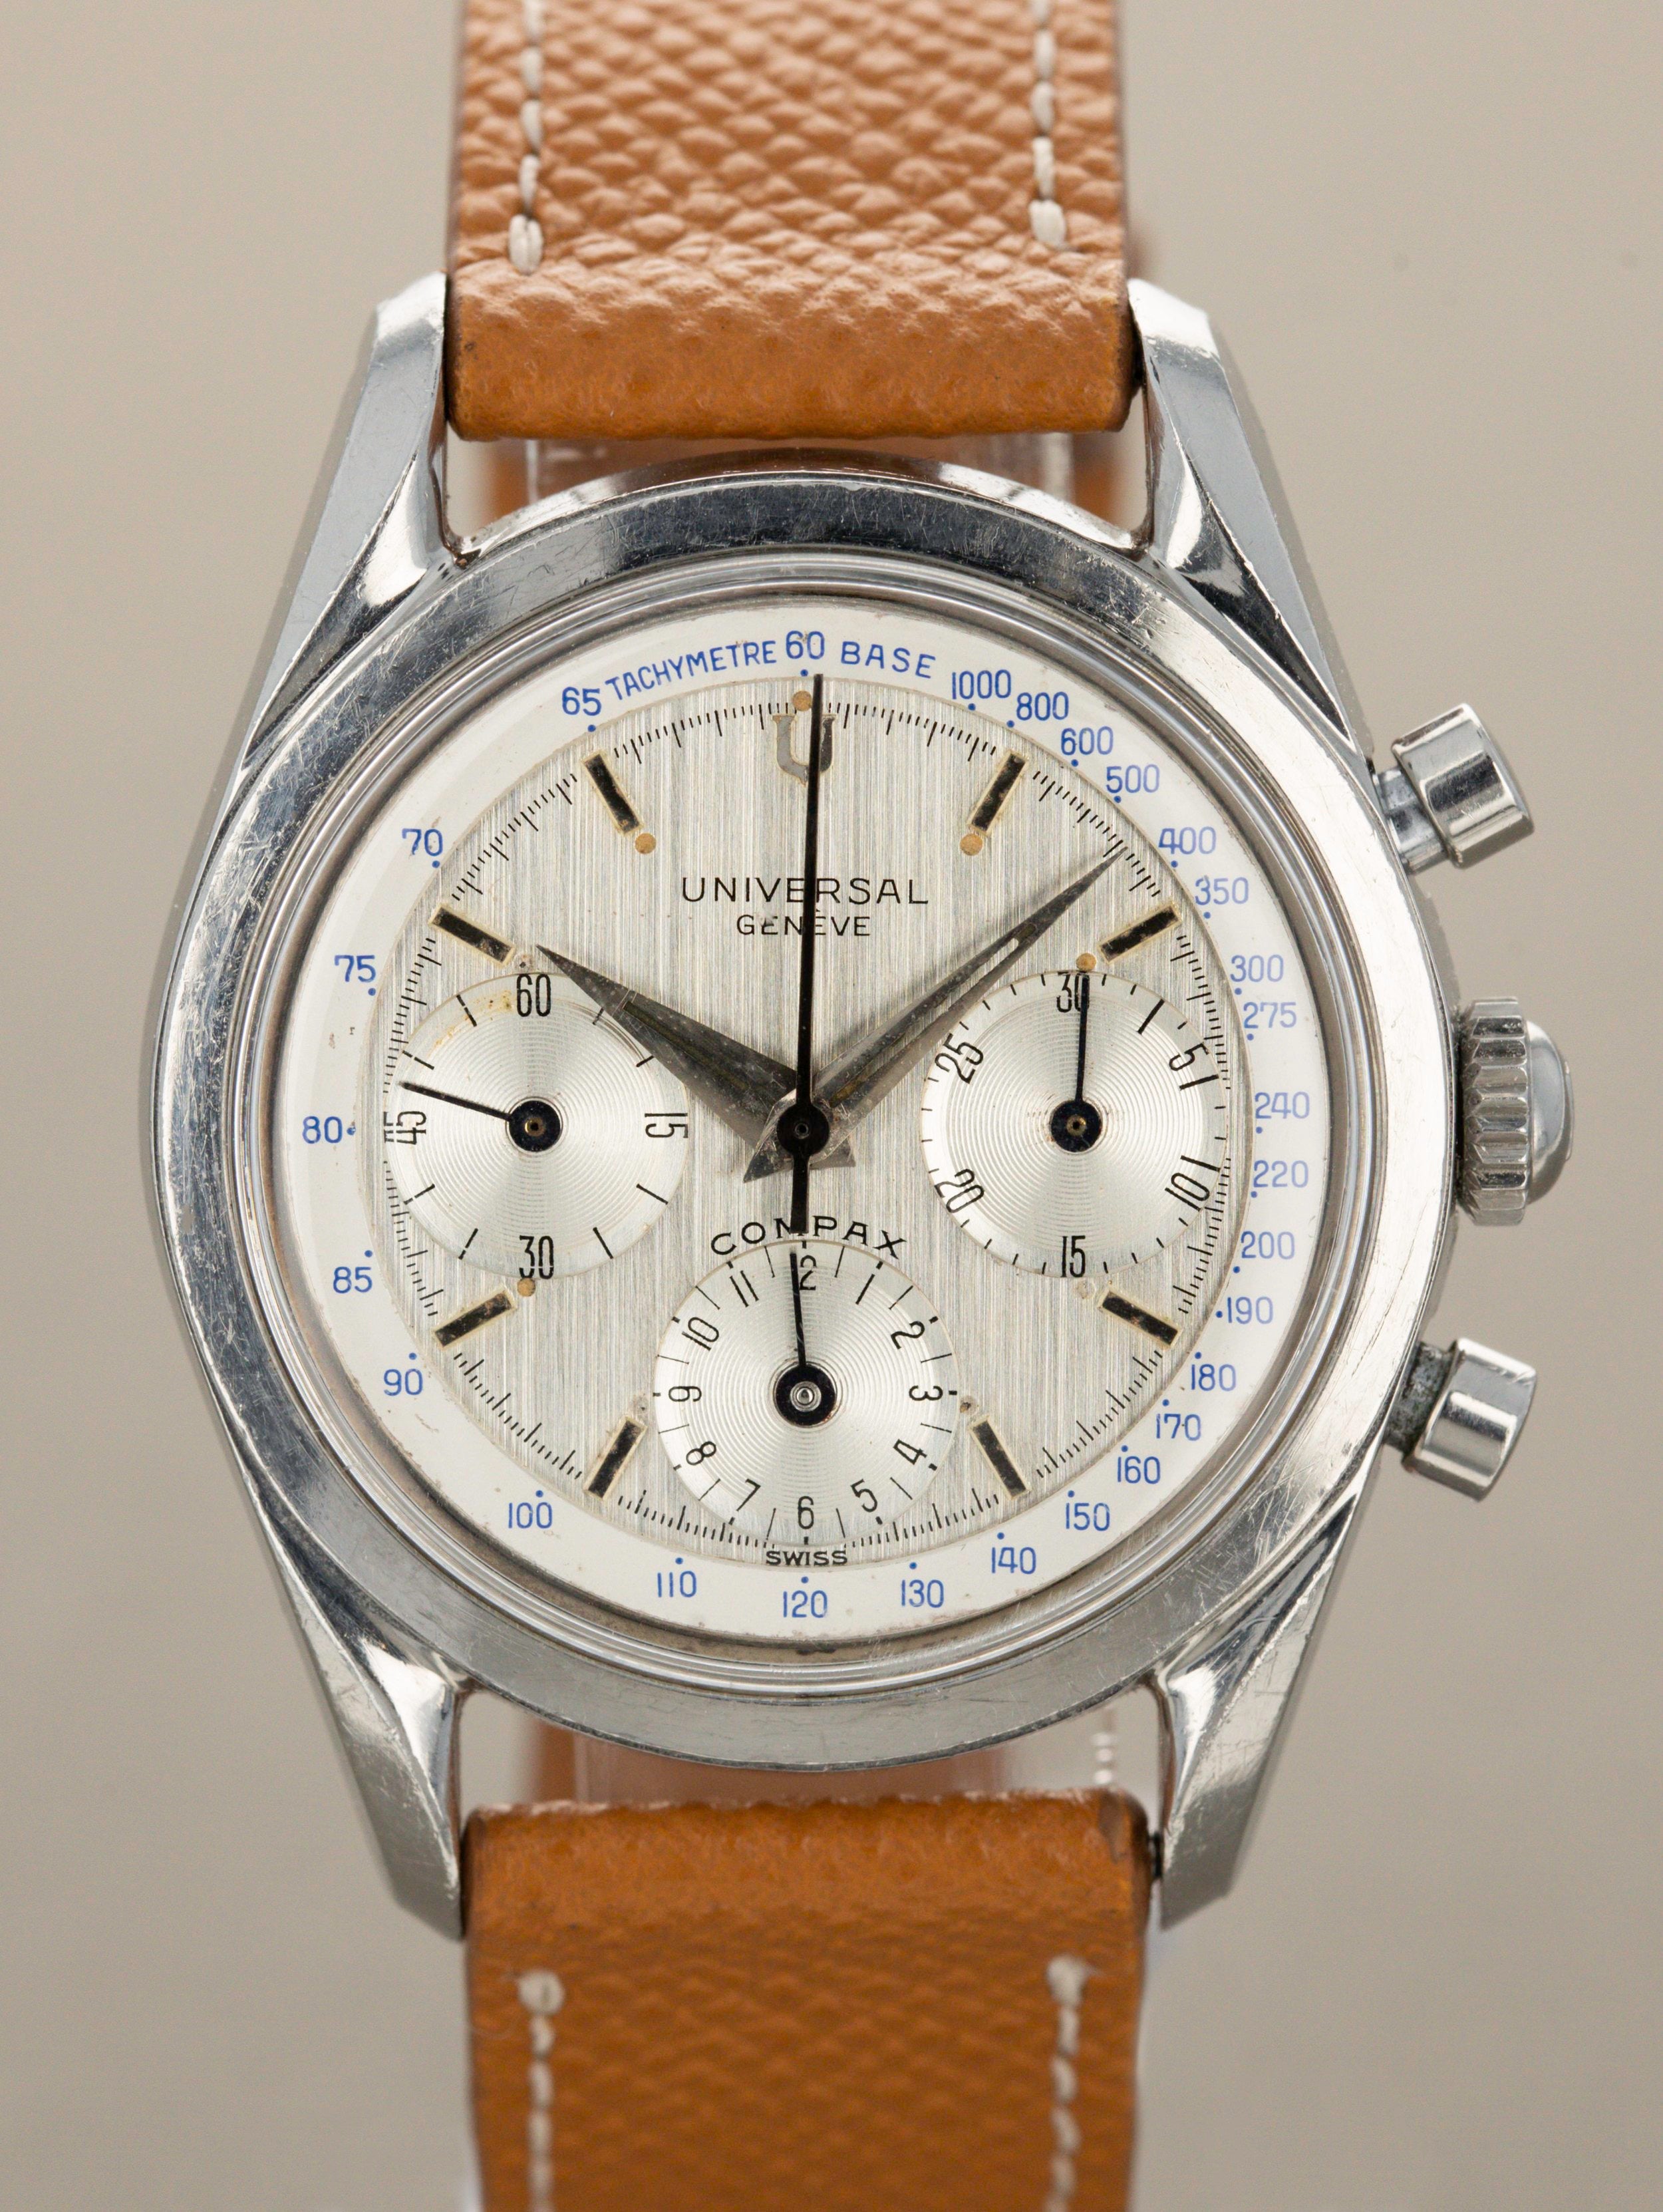 Universal Geneve Tri-Compax Moonphase Stainless Steel Chronograph Watch-  1945-46 | eBay